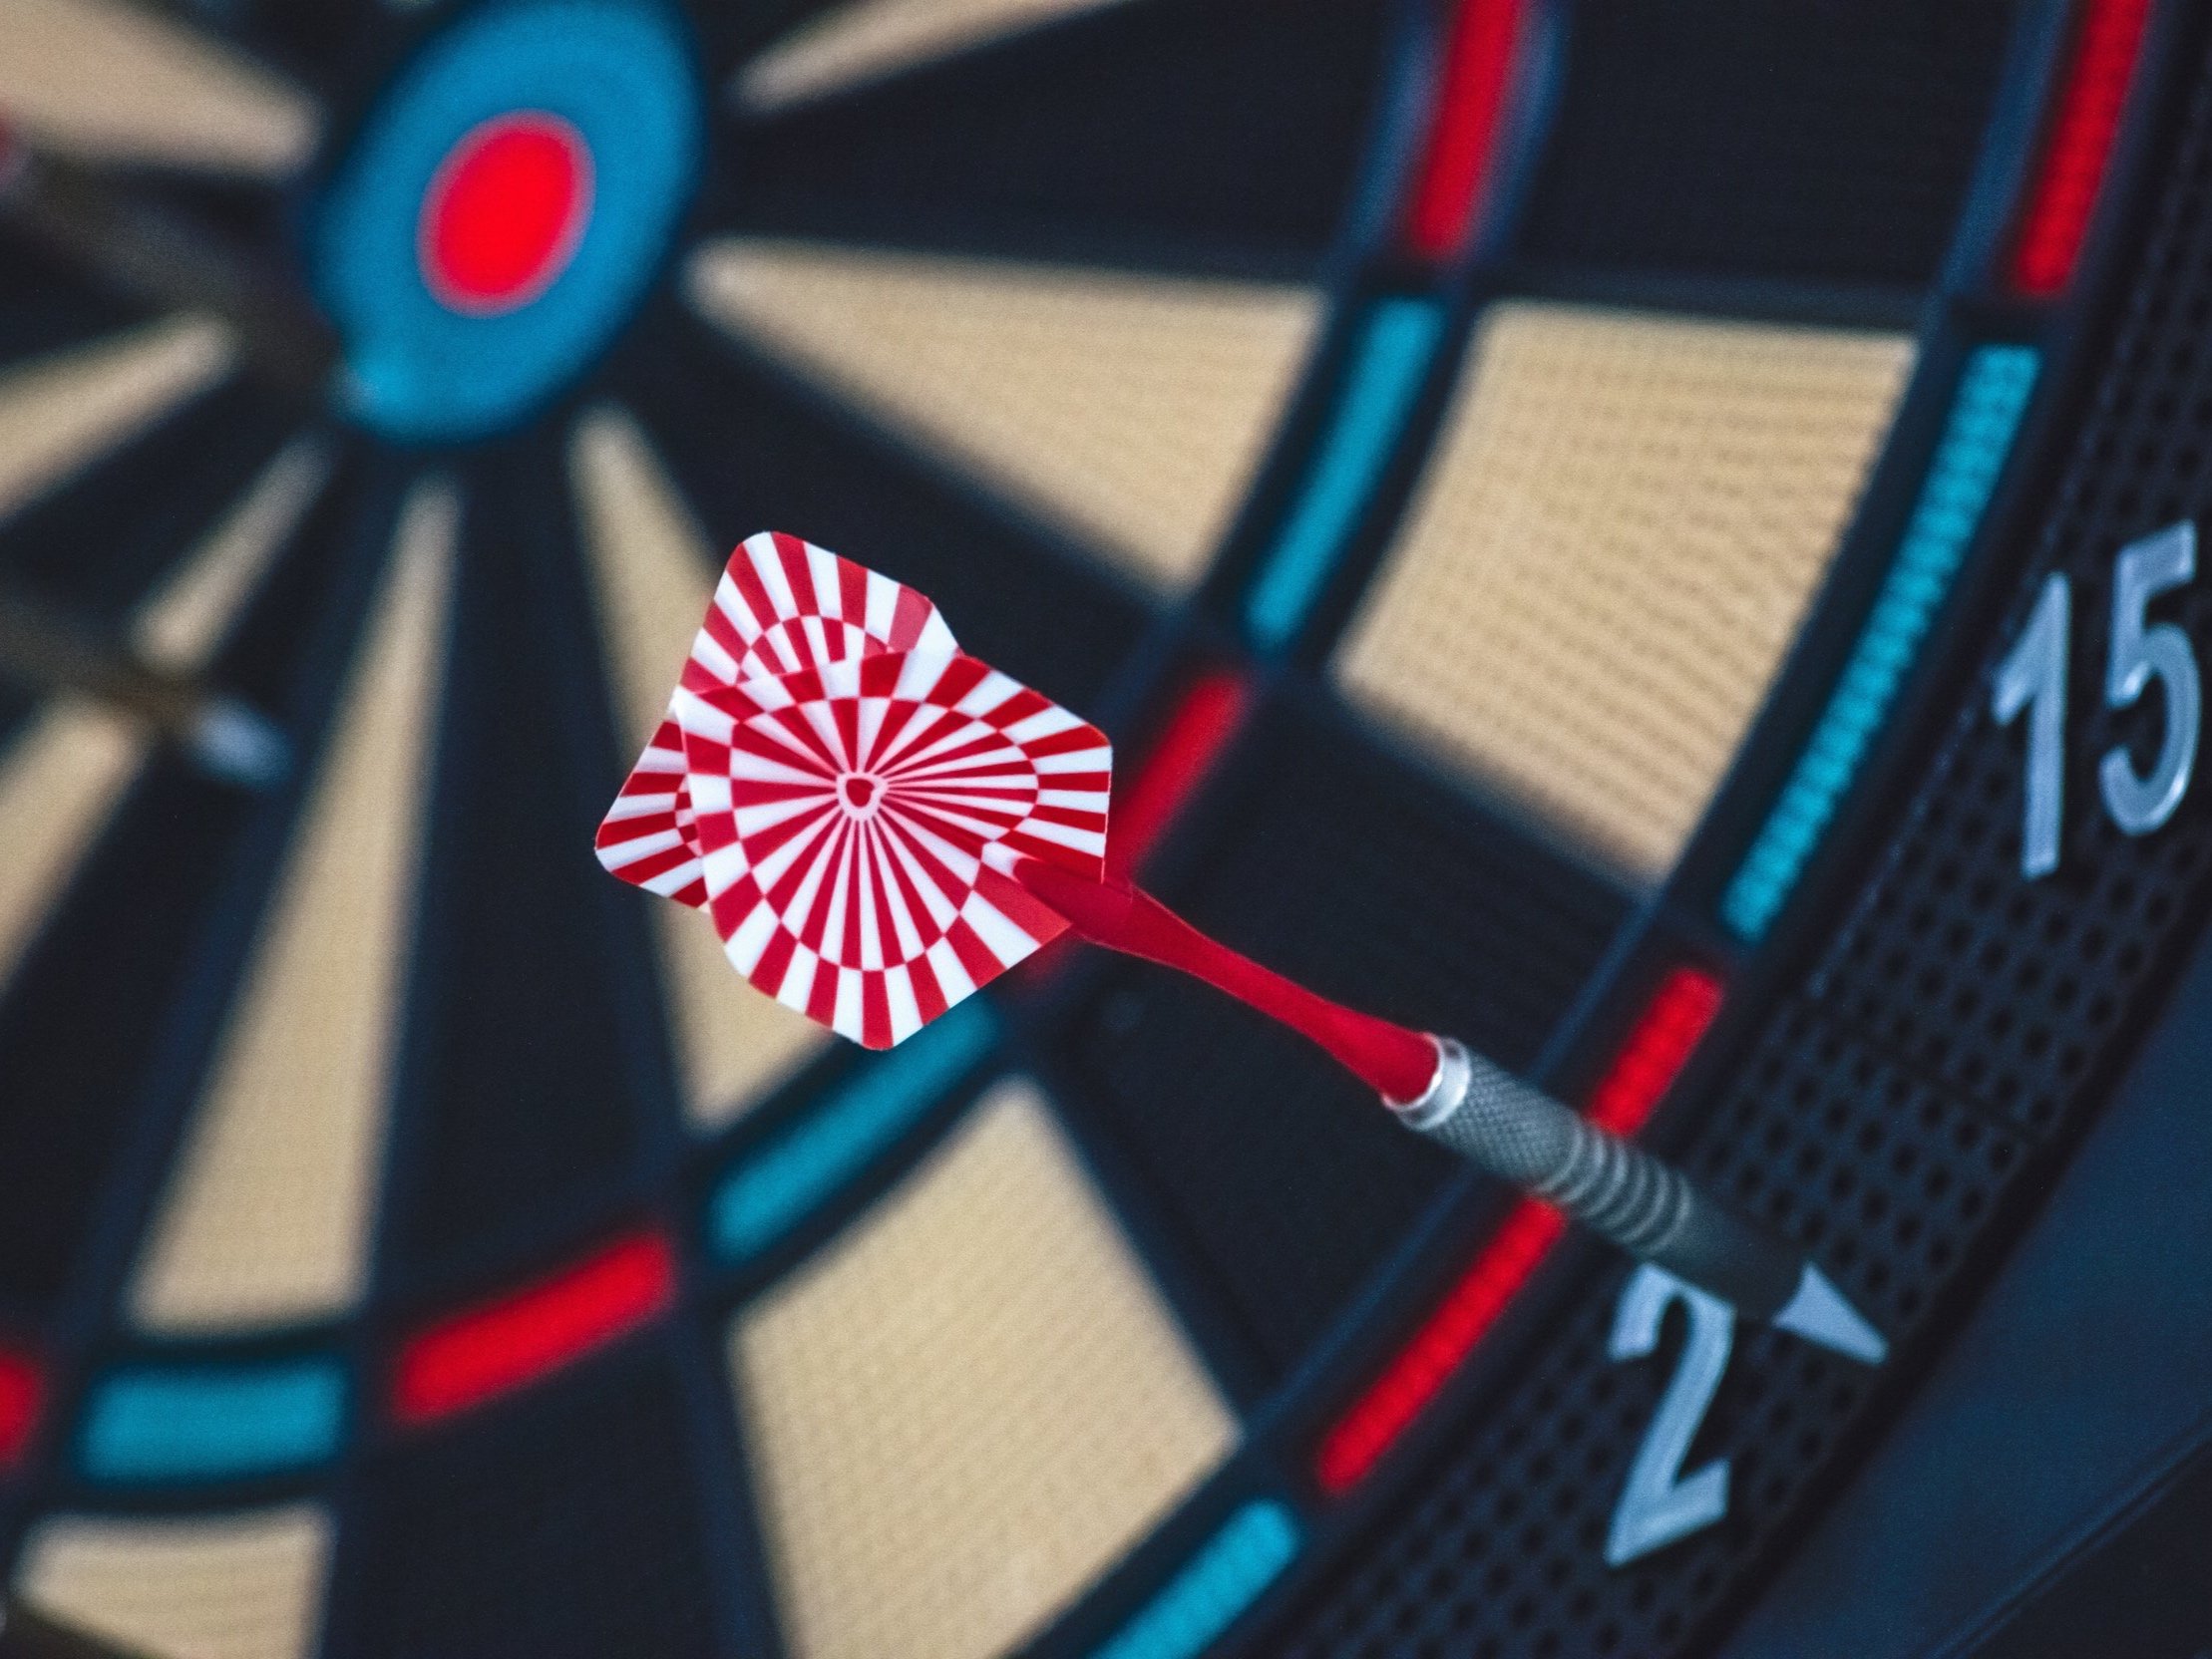 To reach our goals, we need focus, practise, and a steady aim, just like a dart on a dartboard!